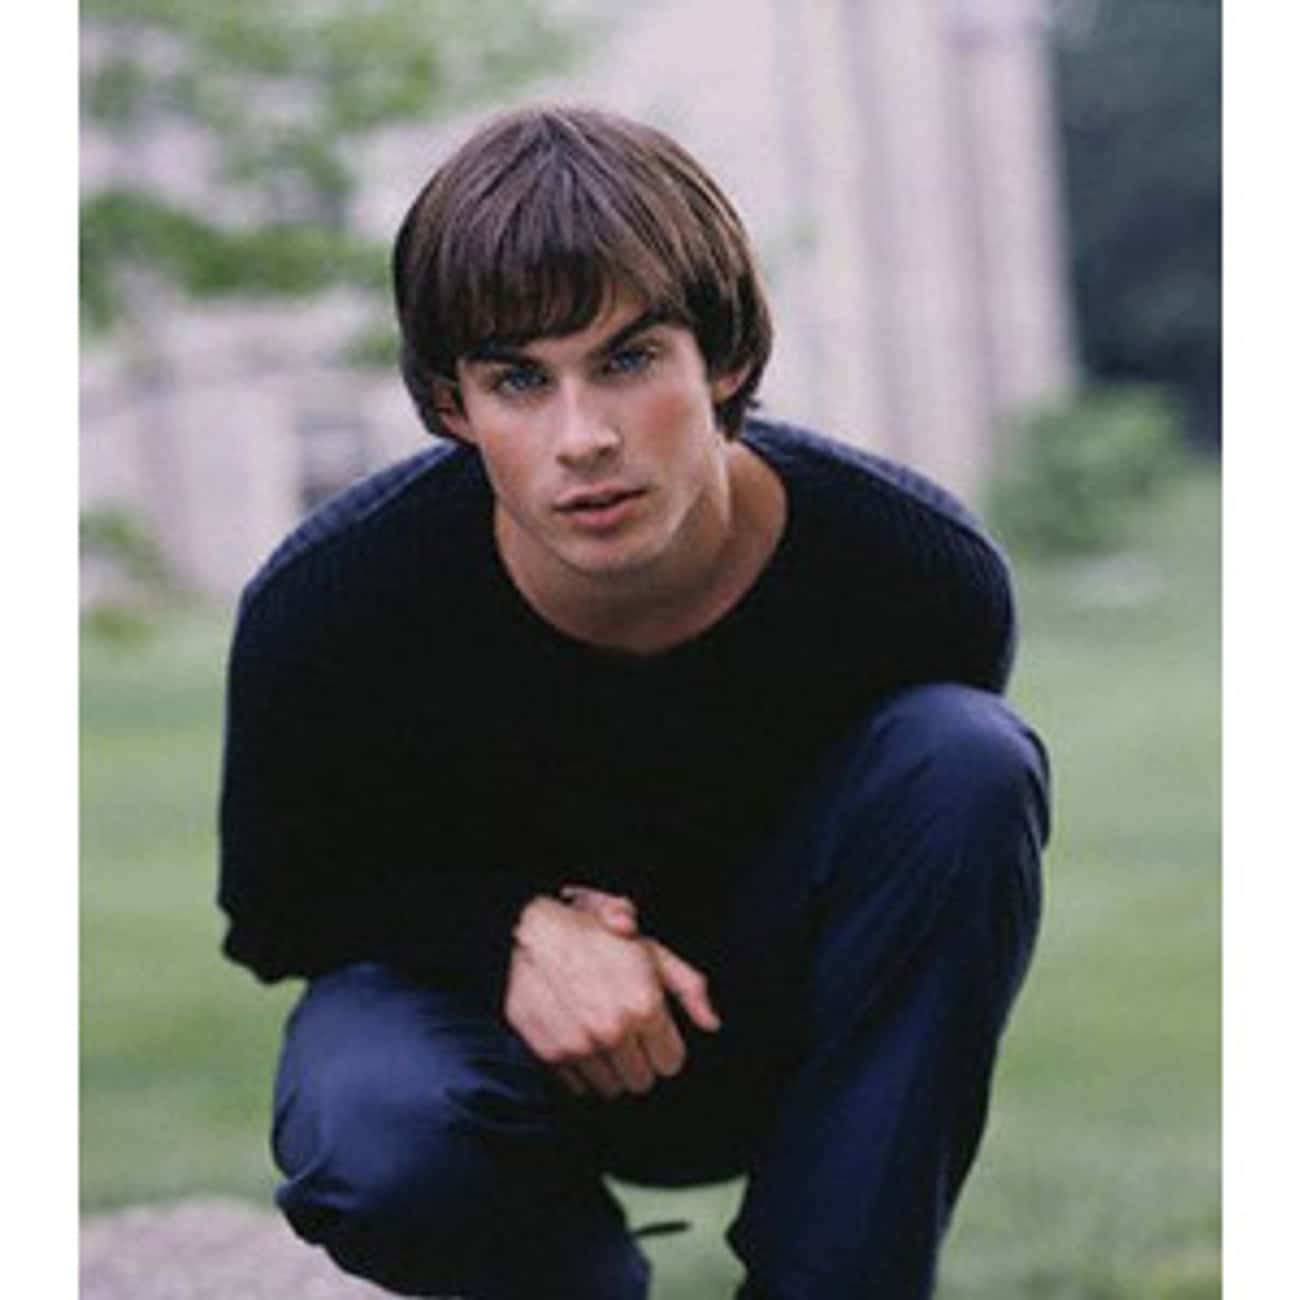 Young Ian Somerhalder in Black Sweater and Blue Jeans